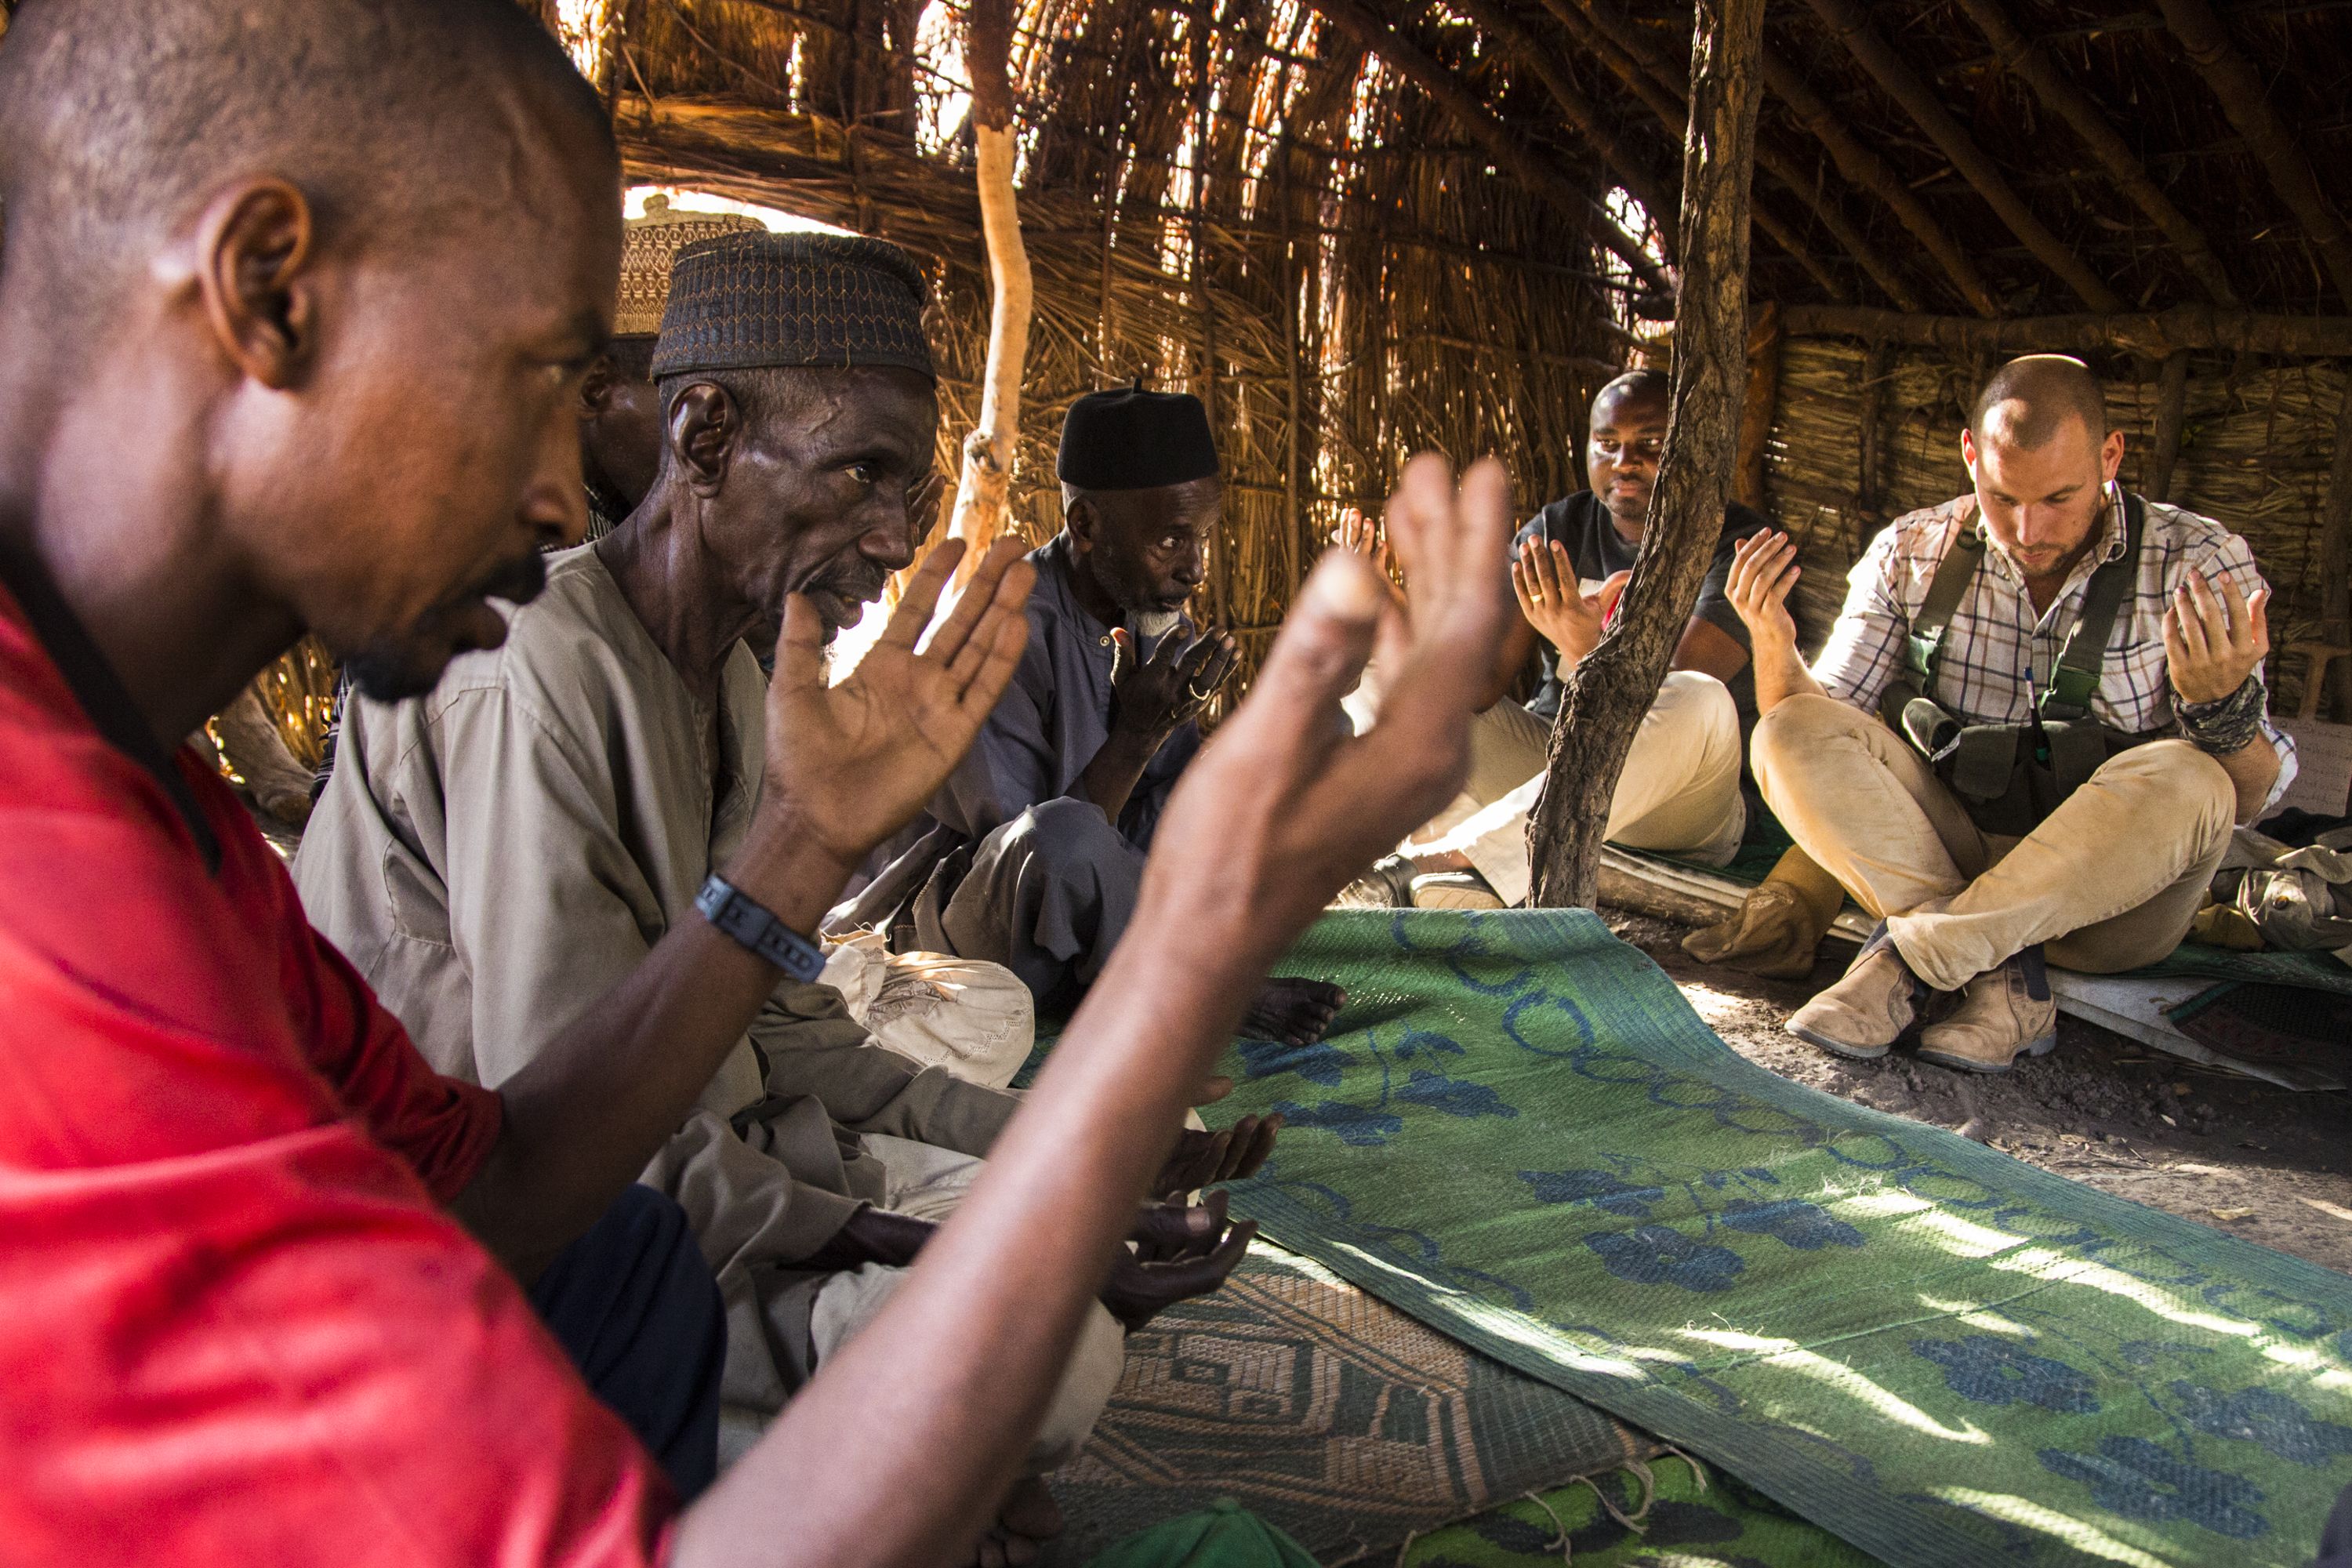 An imam leads prayers at the end of a meeting between Chinko park manager David Simpson and the elders of a community displaced by violence into the remote wilds of the reserve. Image by Jack Losh. Central African Republic, 2018.